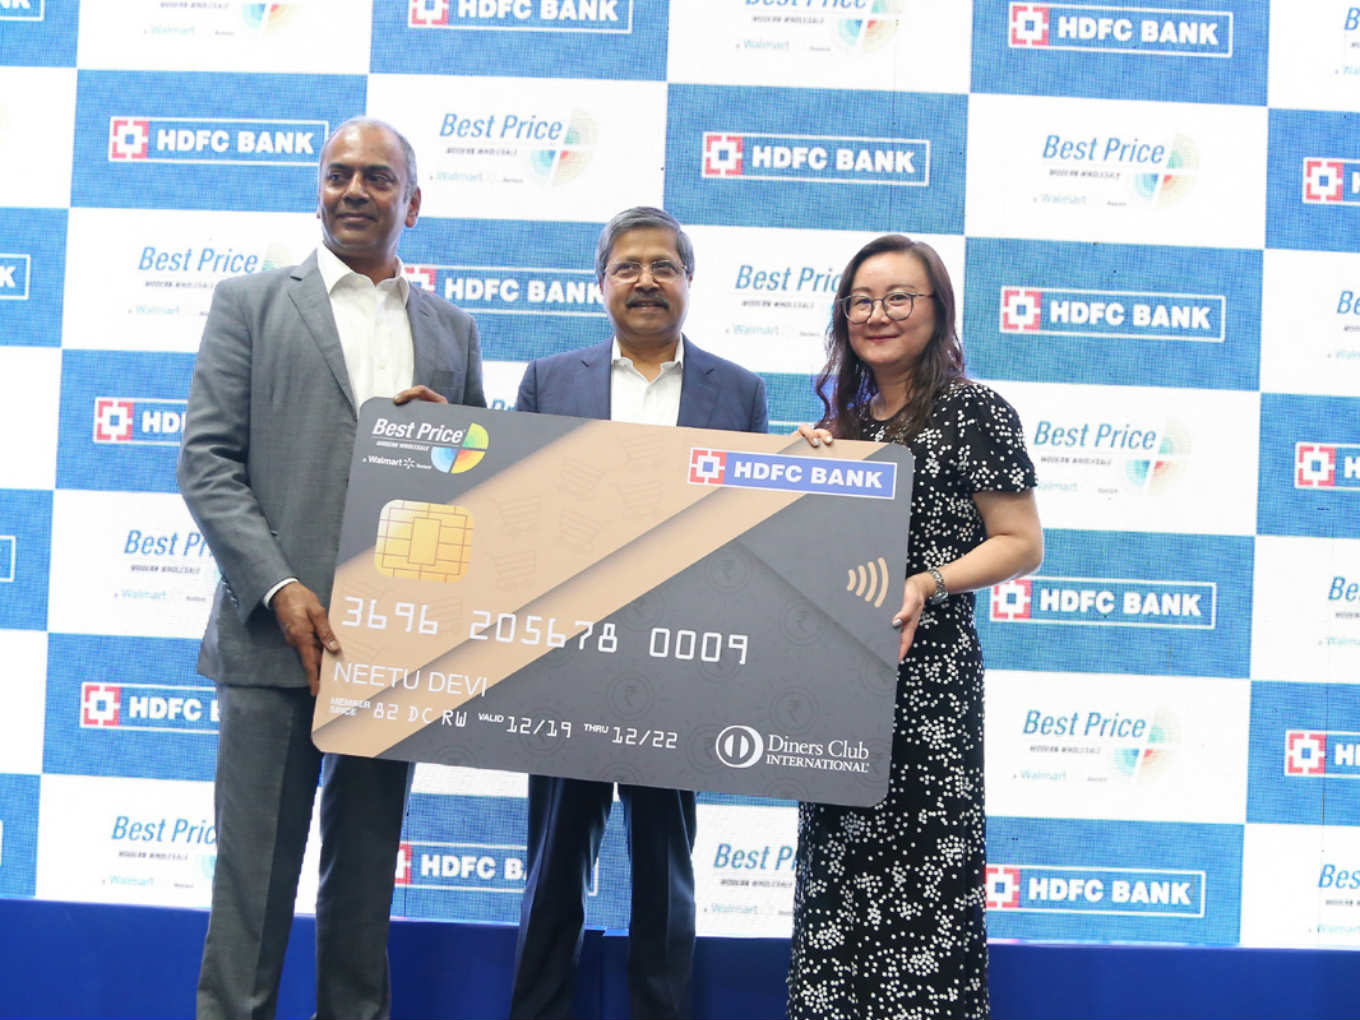 Walmart India Ties Up With HDFC Bank To Launch Co-Branded Credit Card